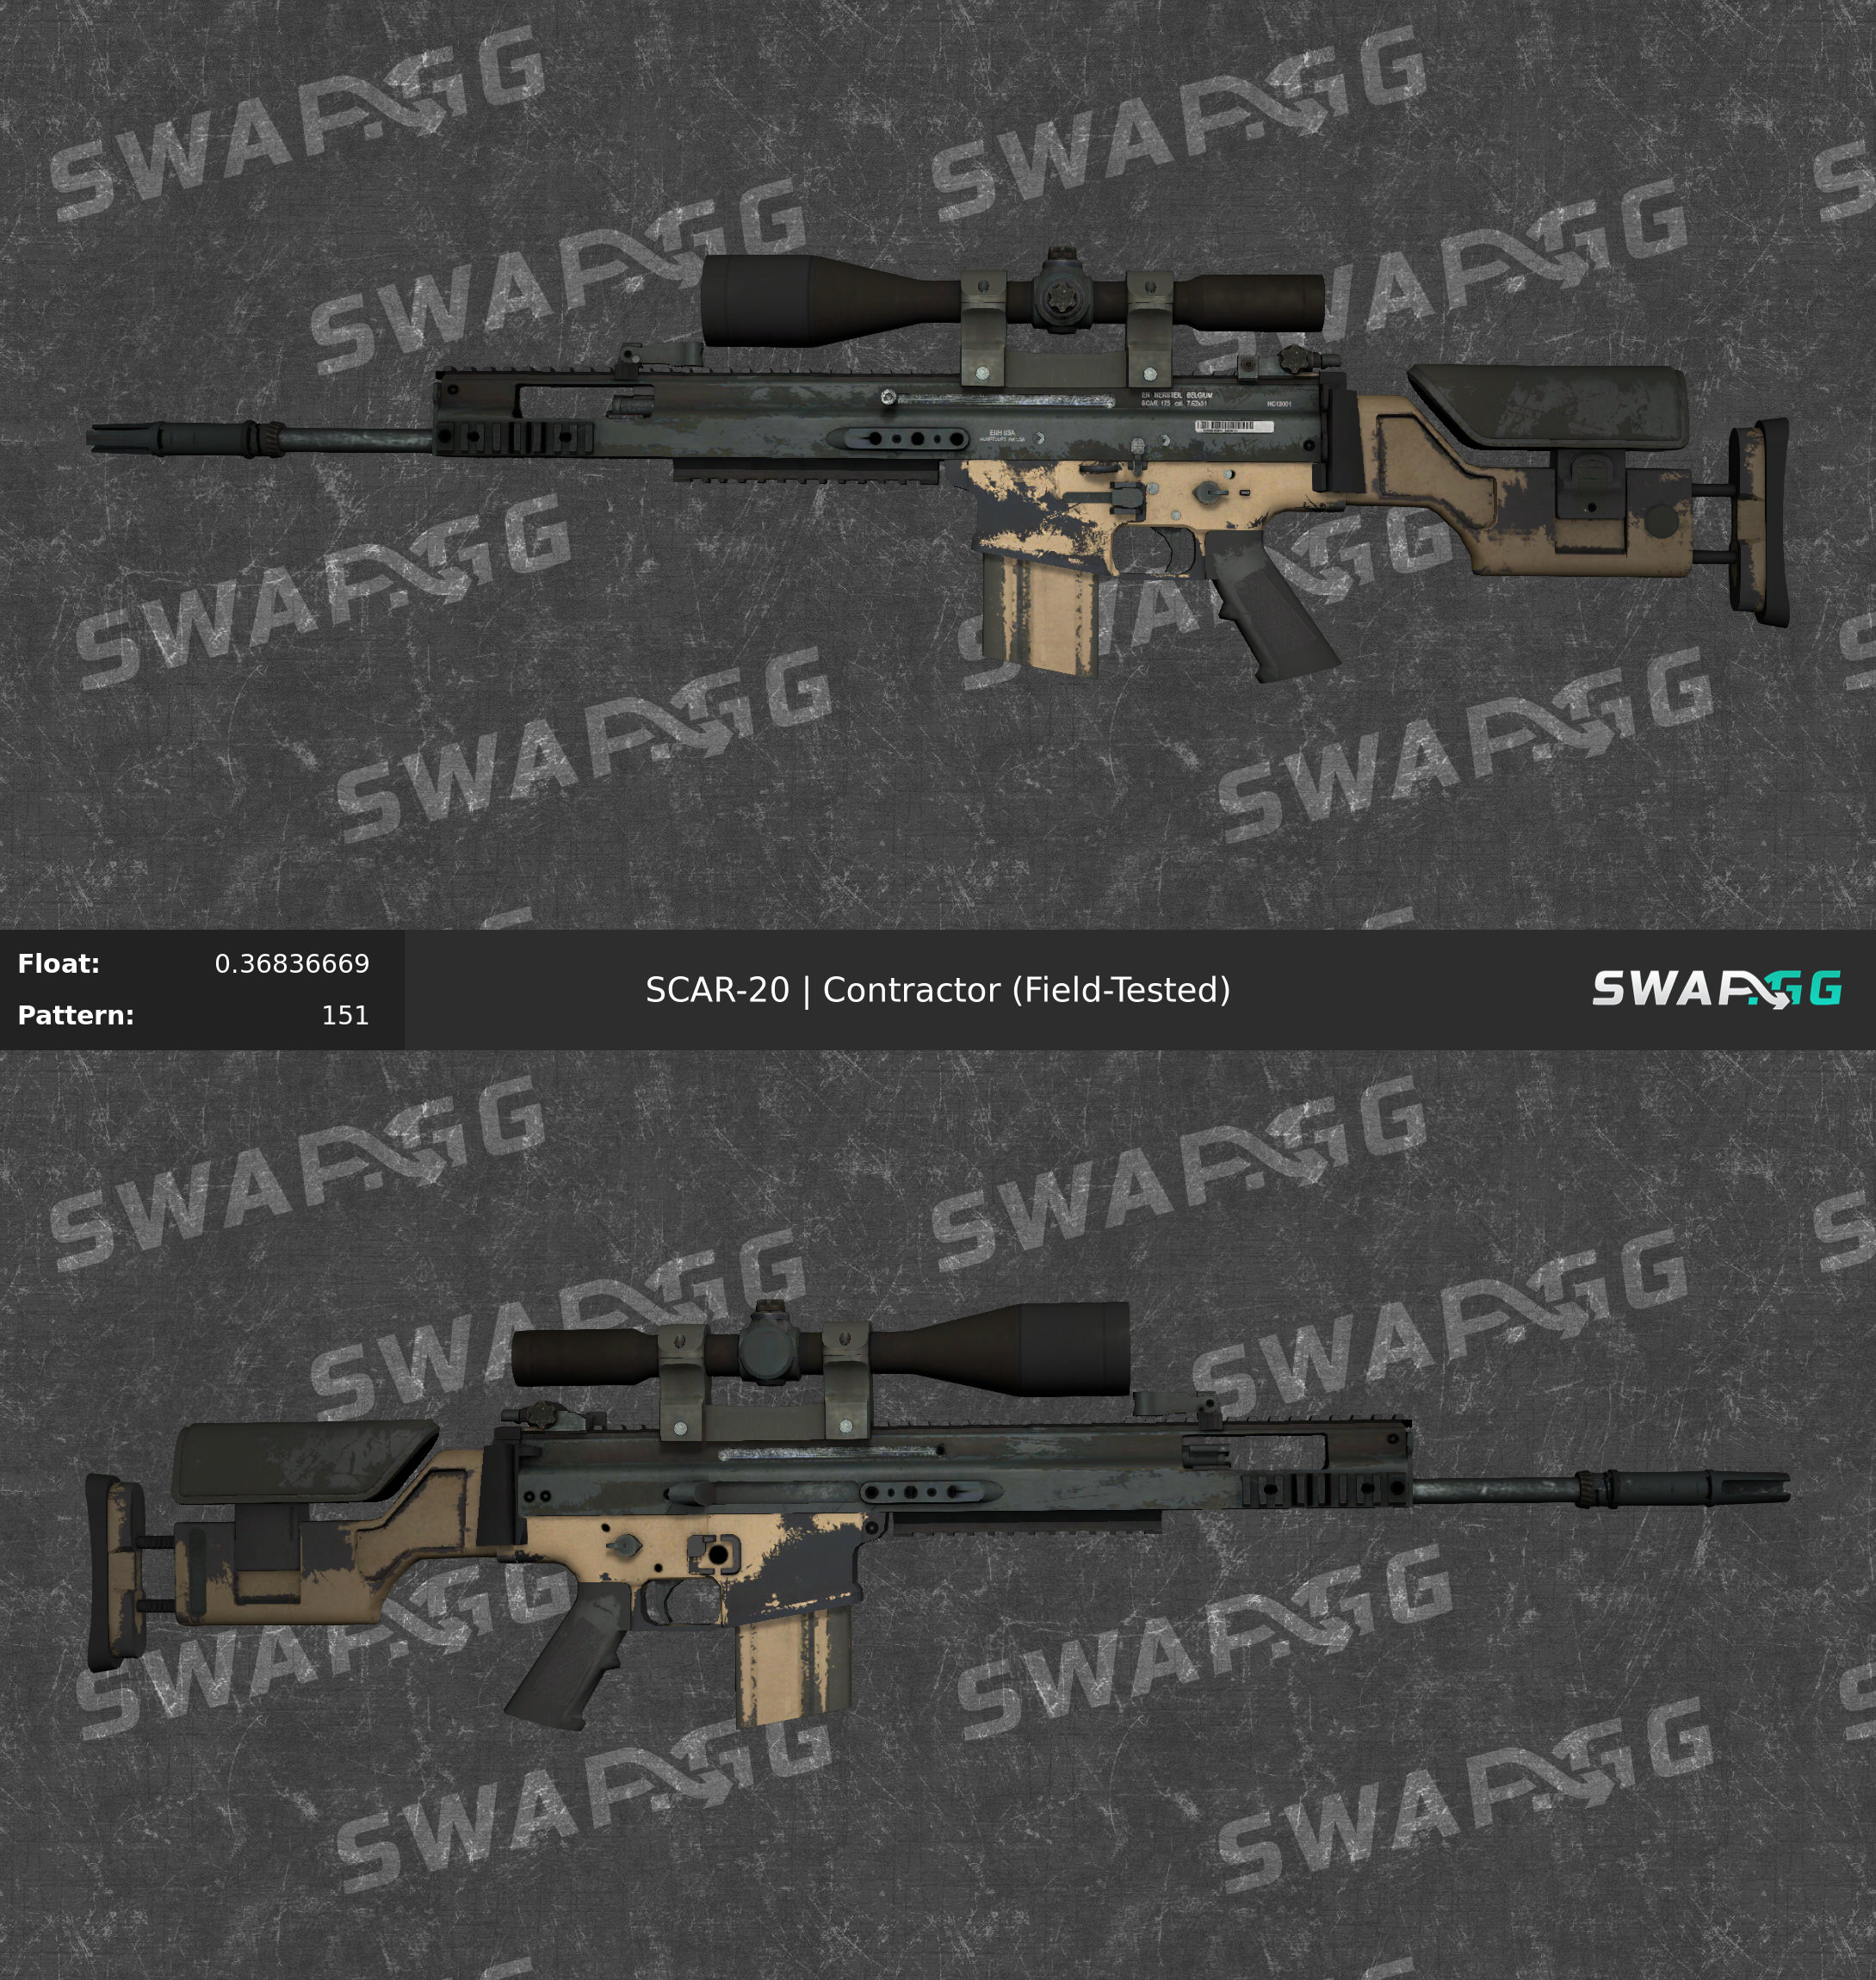 SCAR-20 Contractor cs go skin download the new for windows